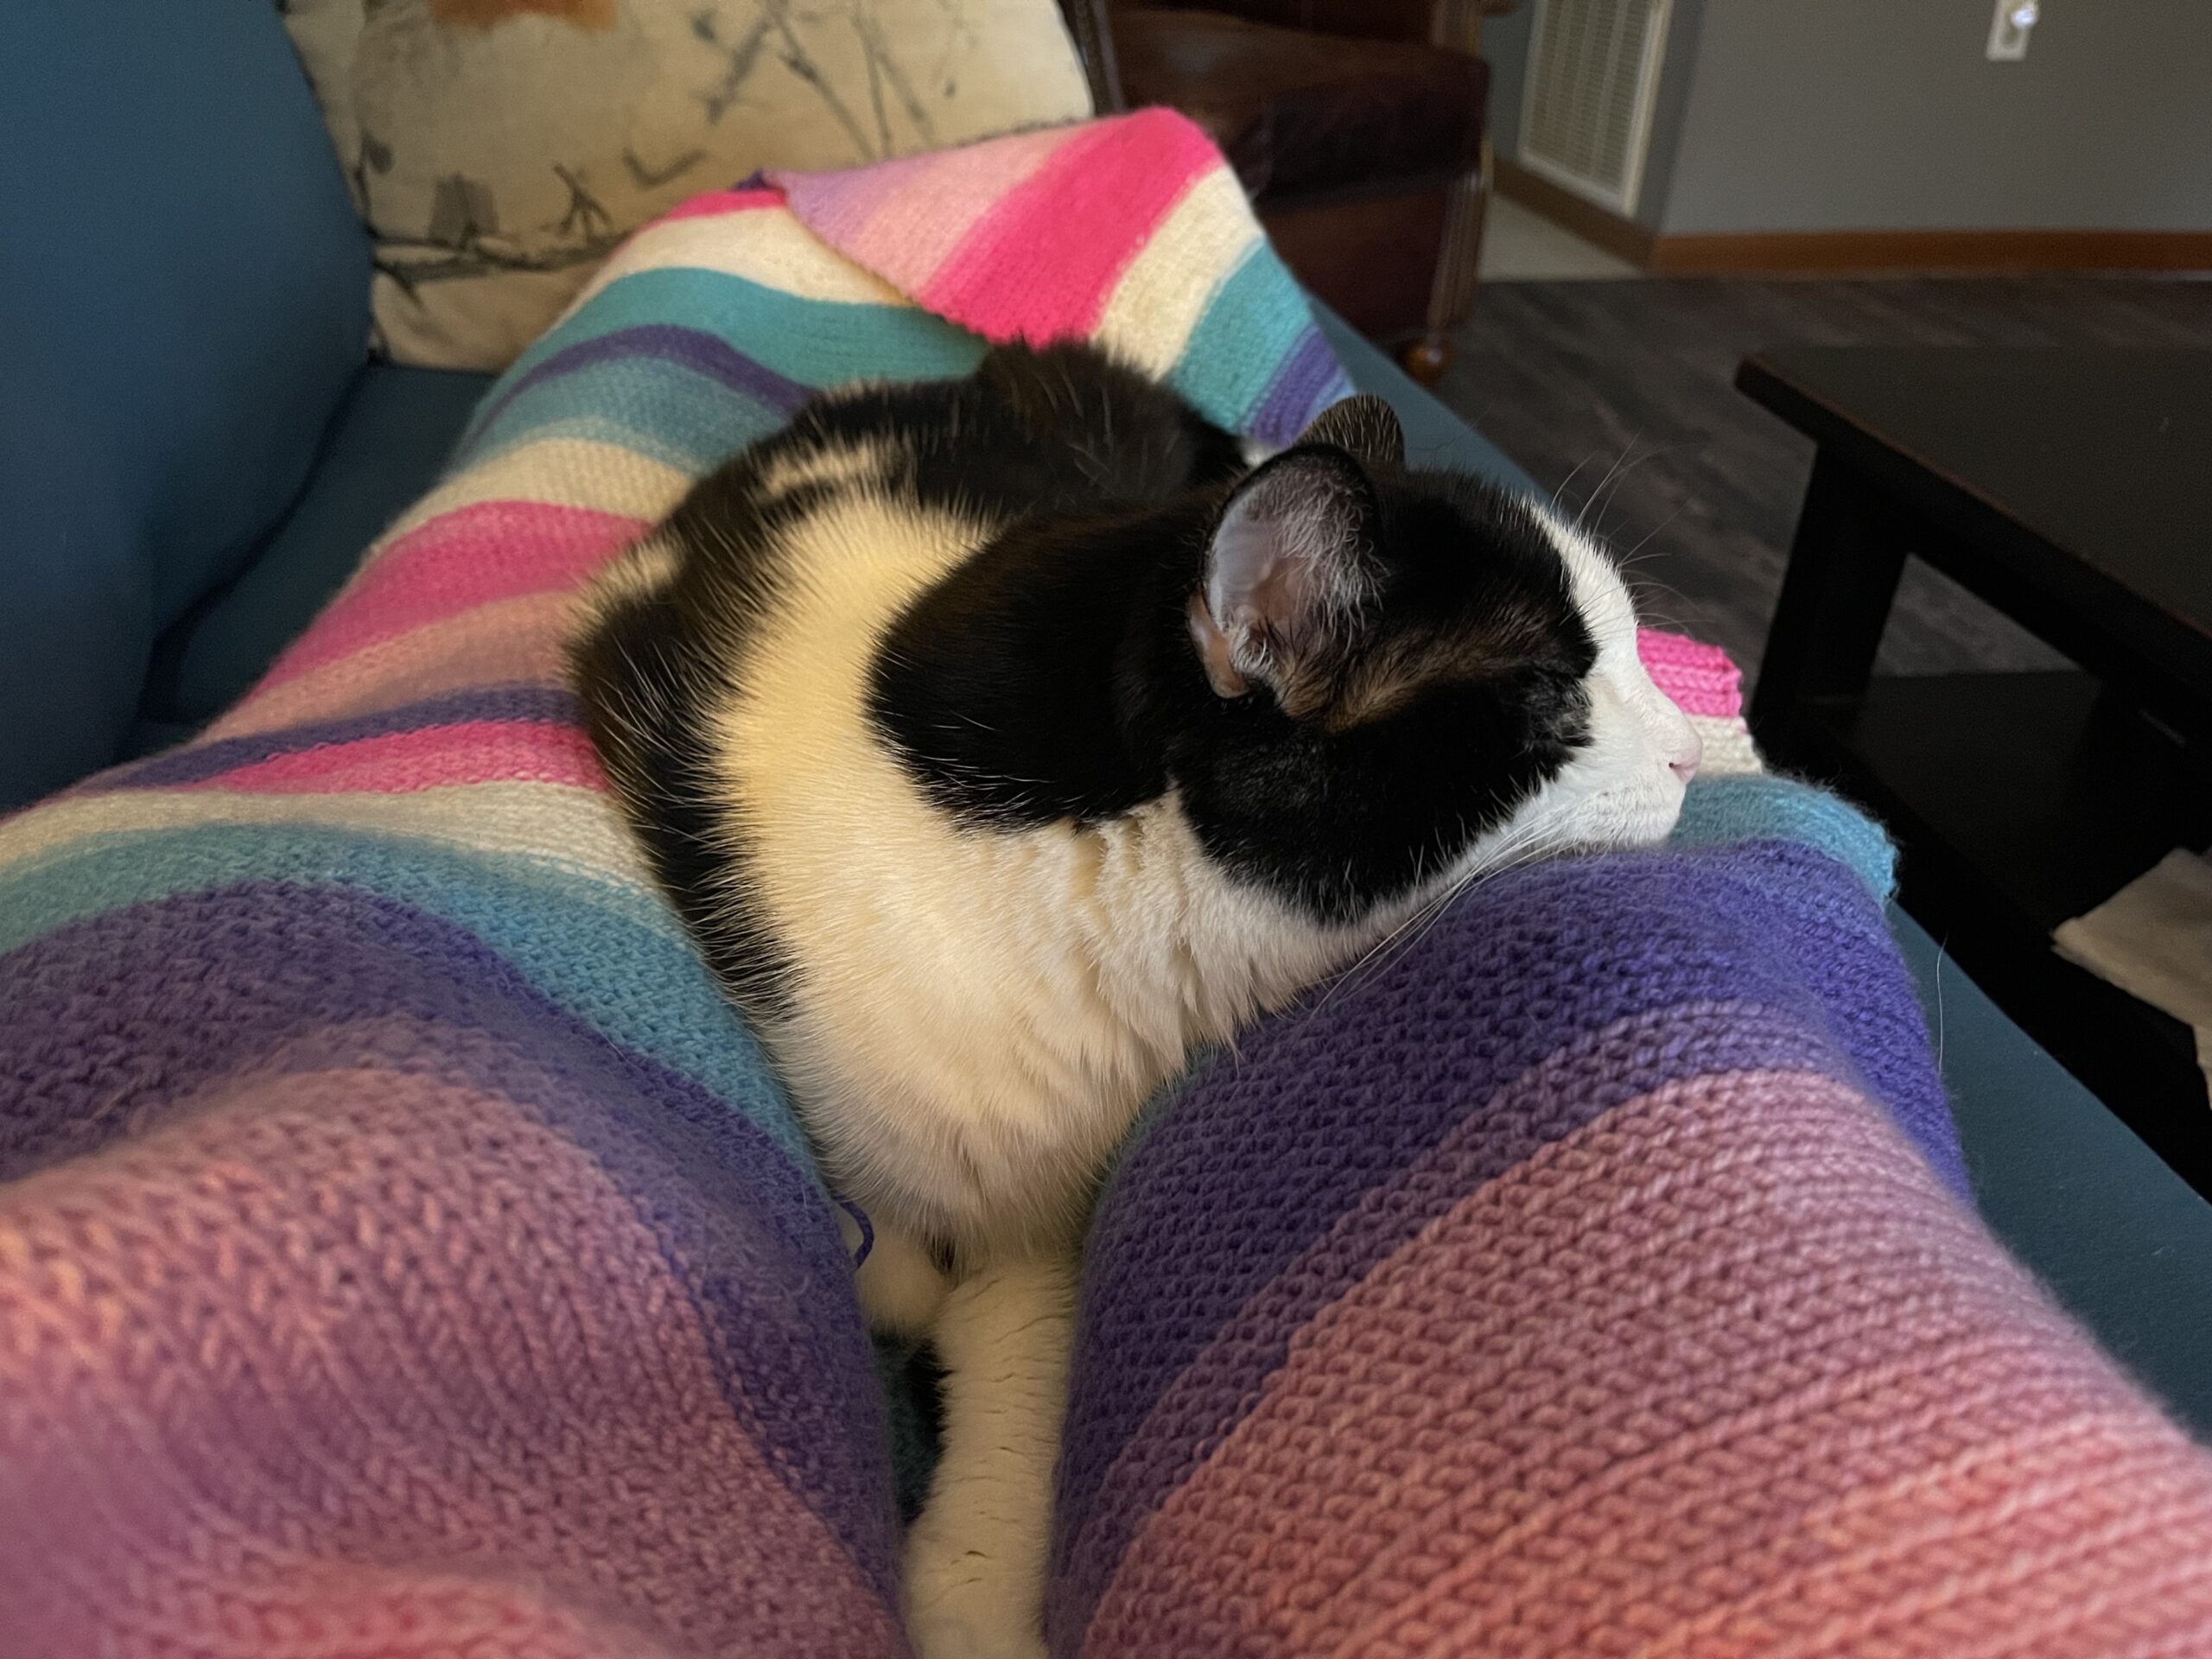 Oreo the cat shares the blanket